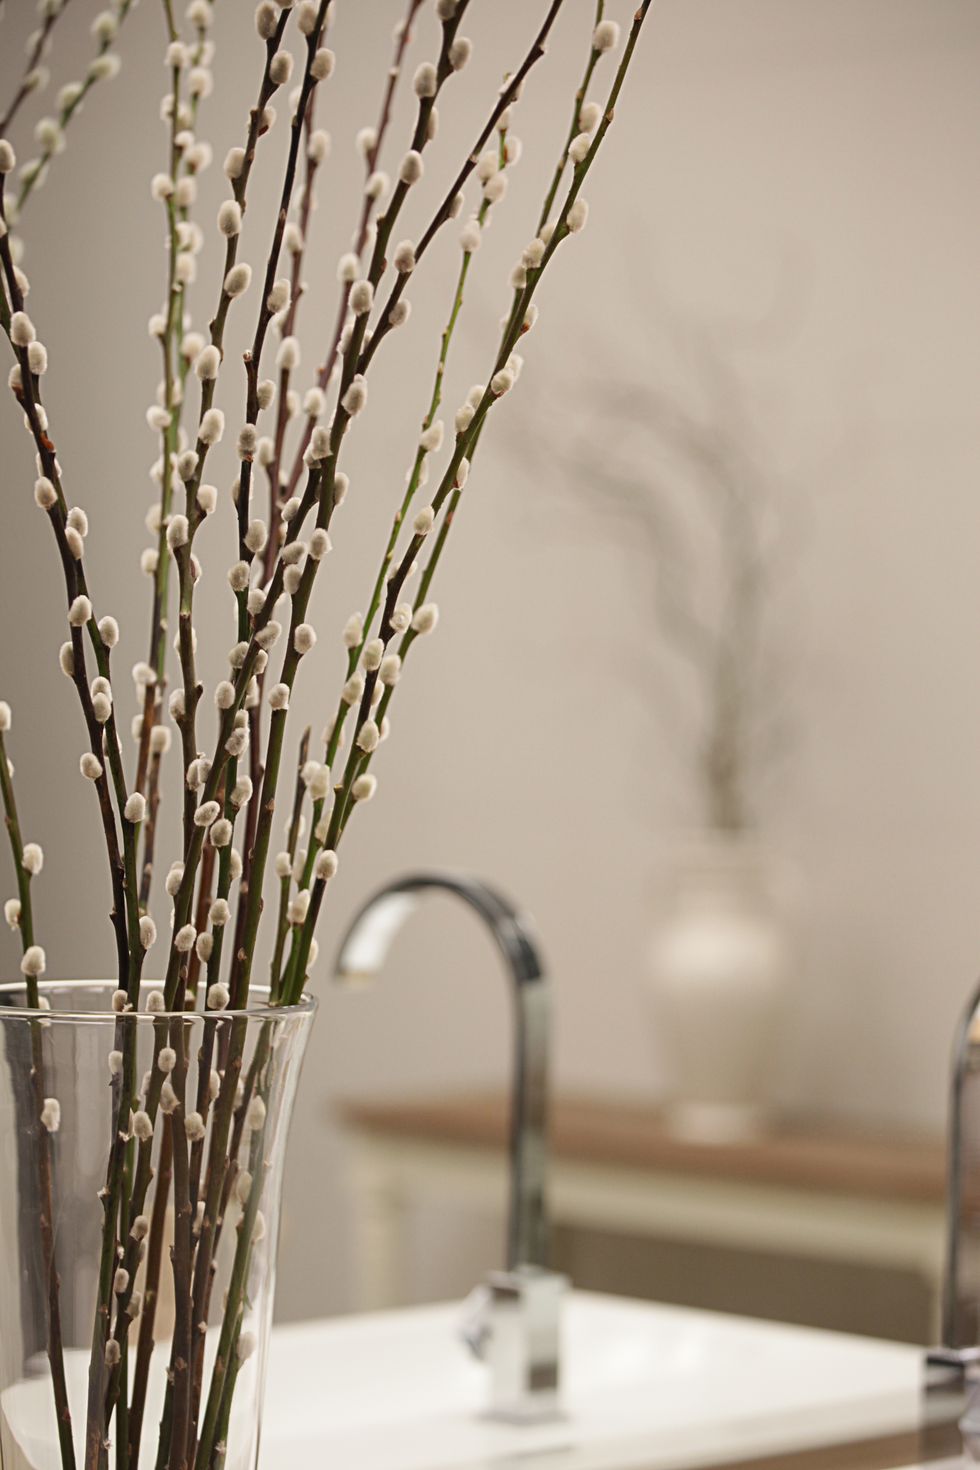 some pussy willow in vase put in a bathroom